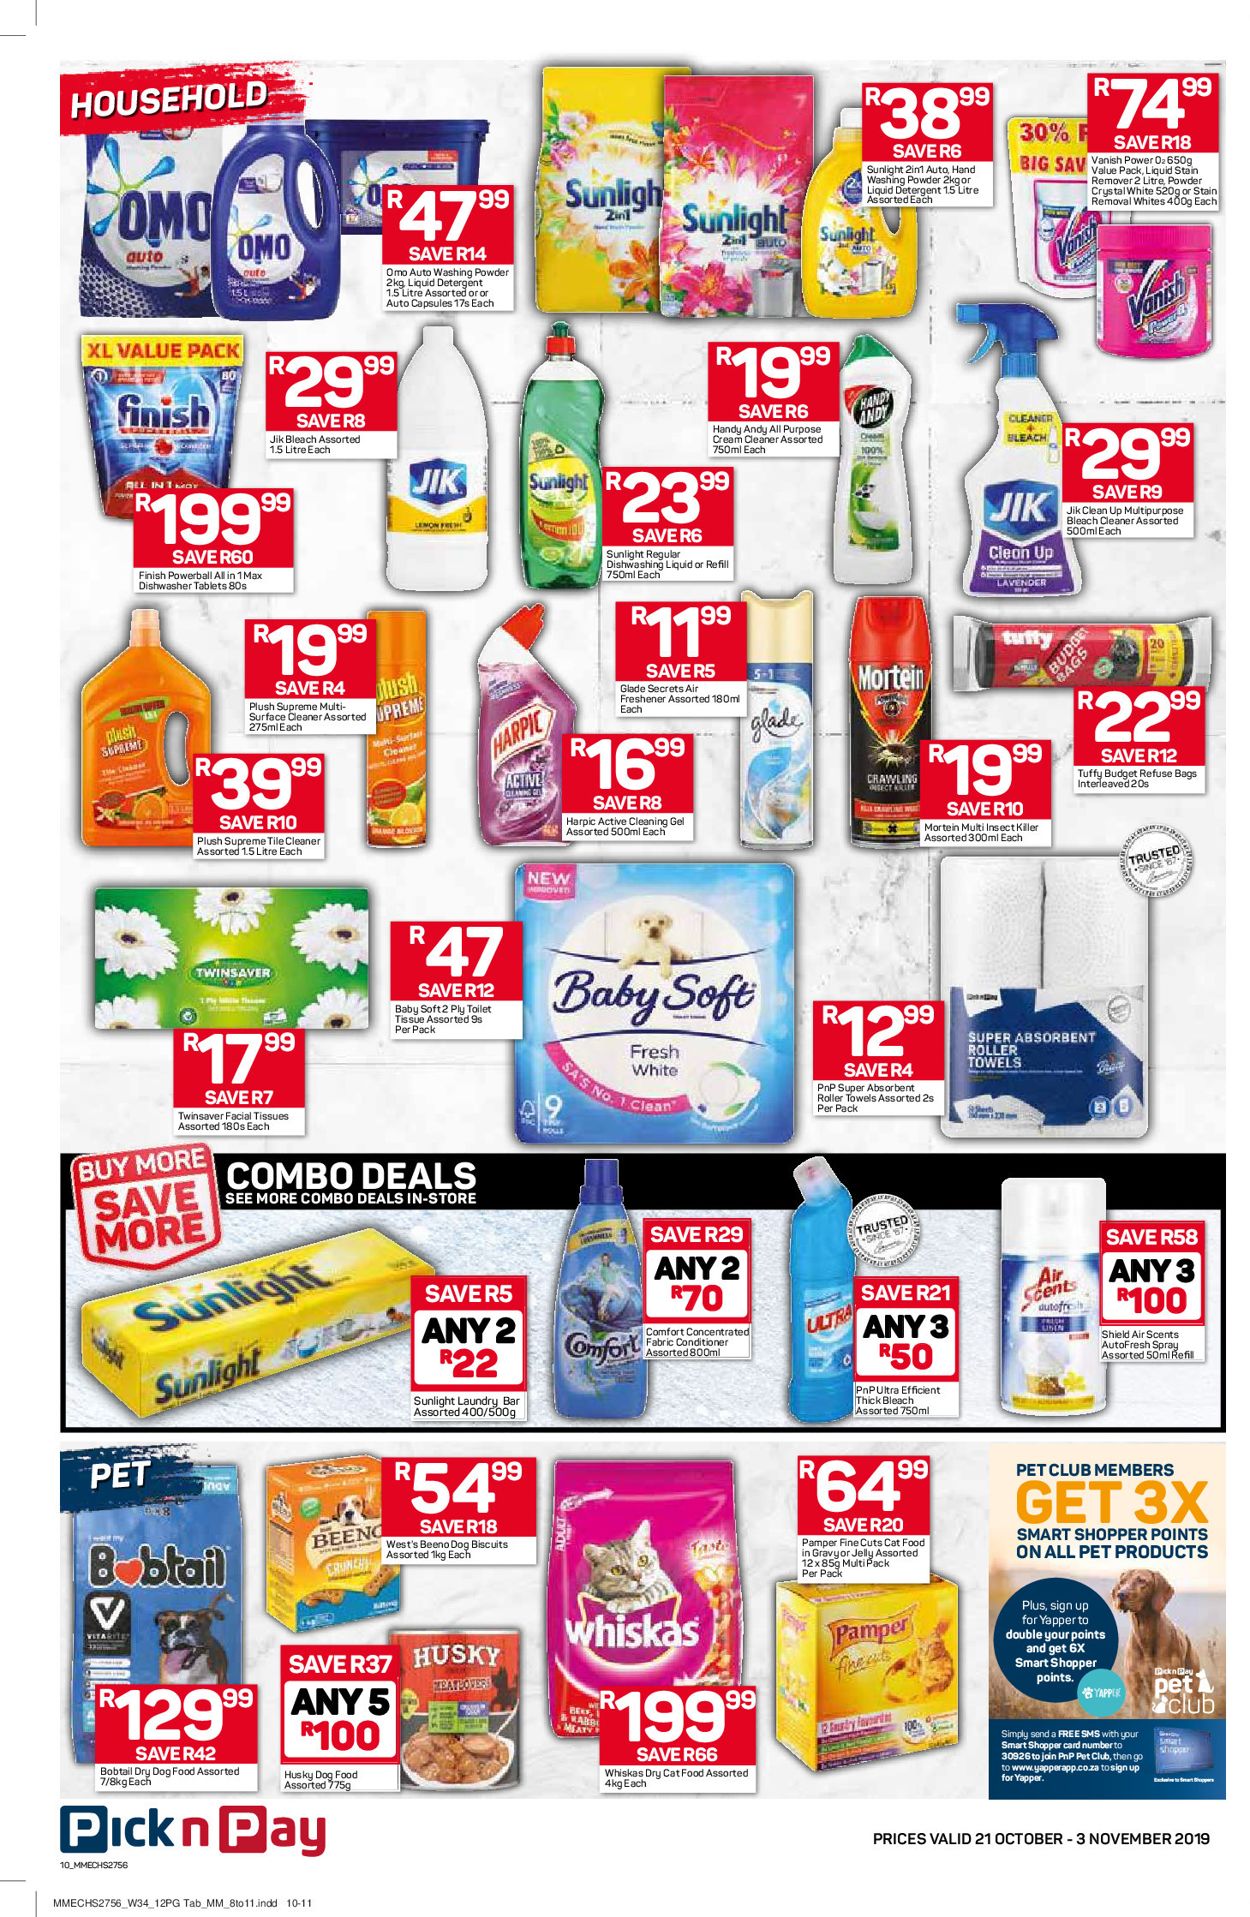 Pick n Pay Current catalogue 2019/10/21 - 2019/11/03 [11]